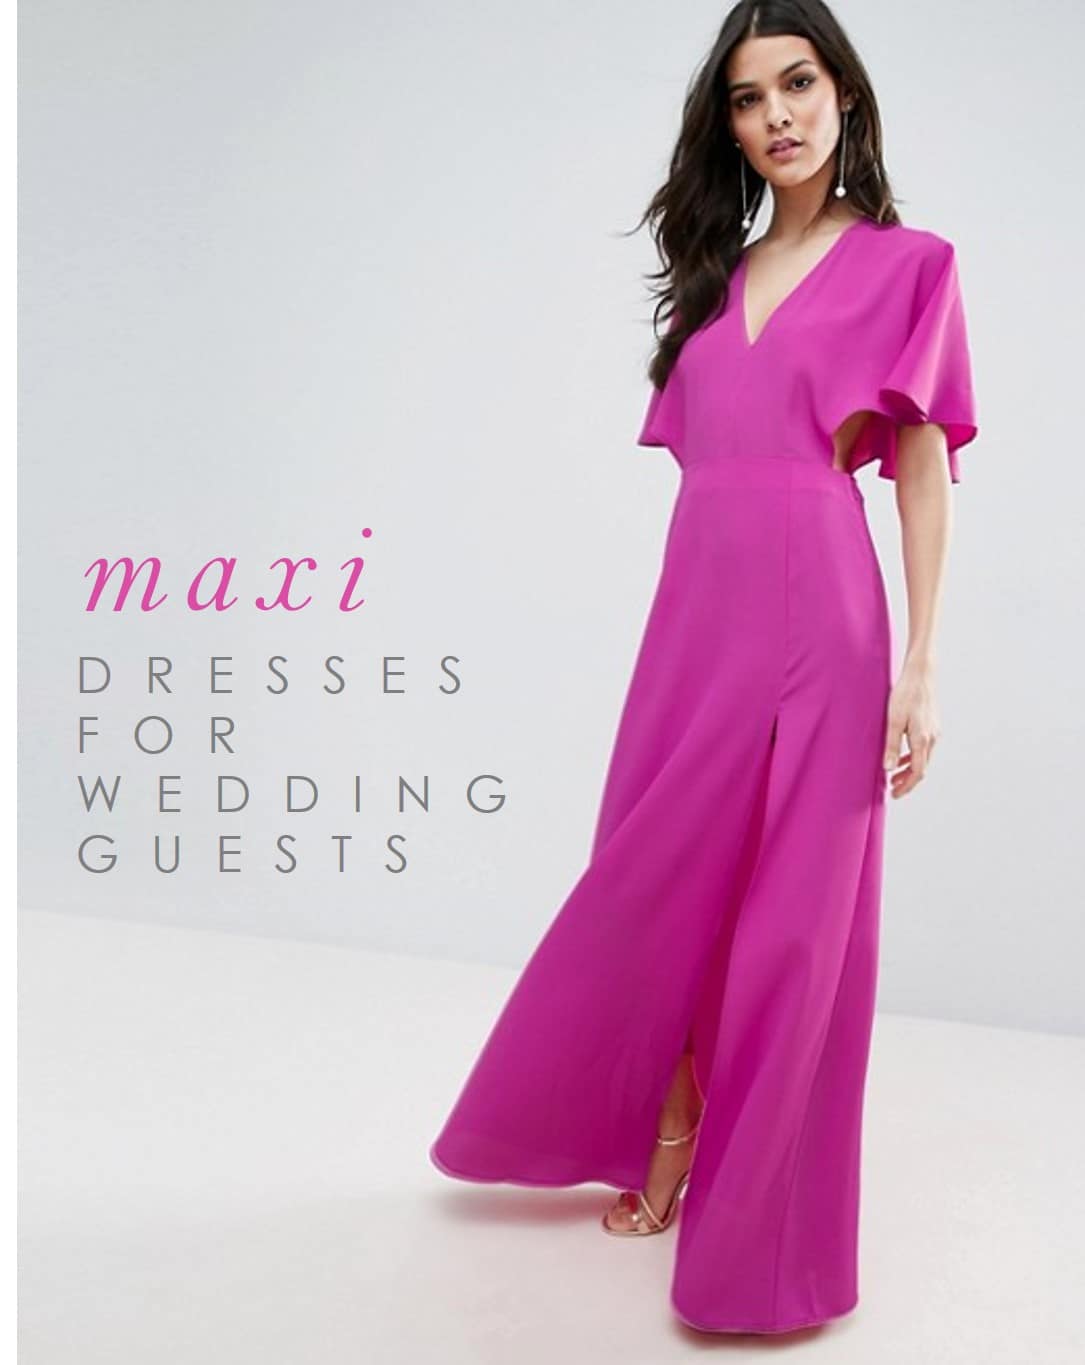 Maxi Dresses For Wedding Guest